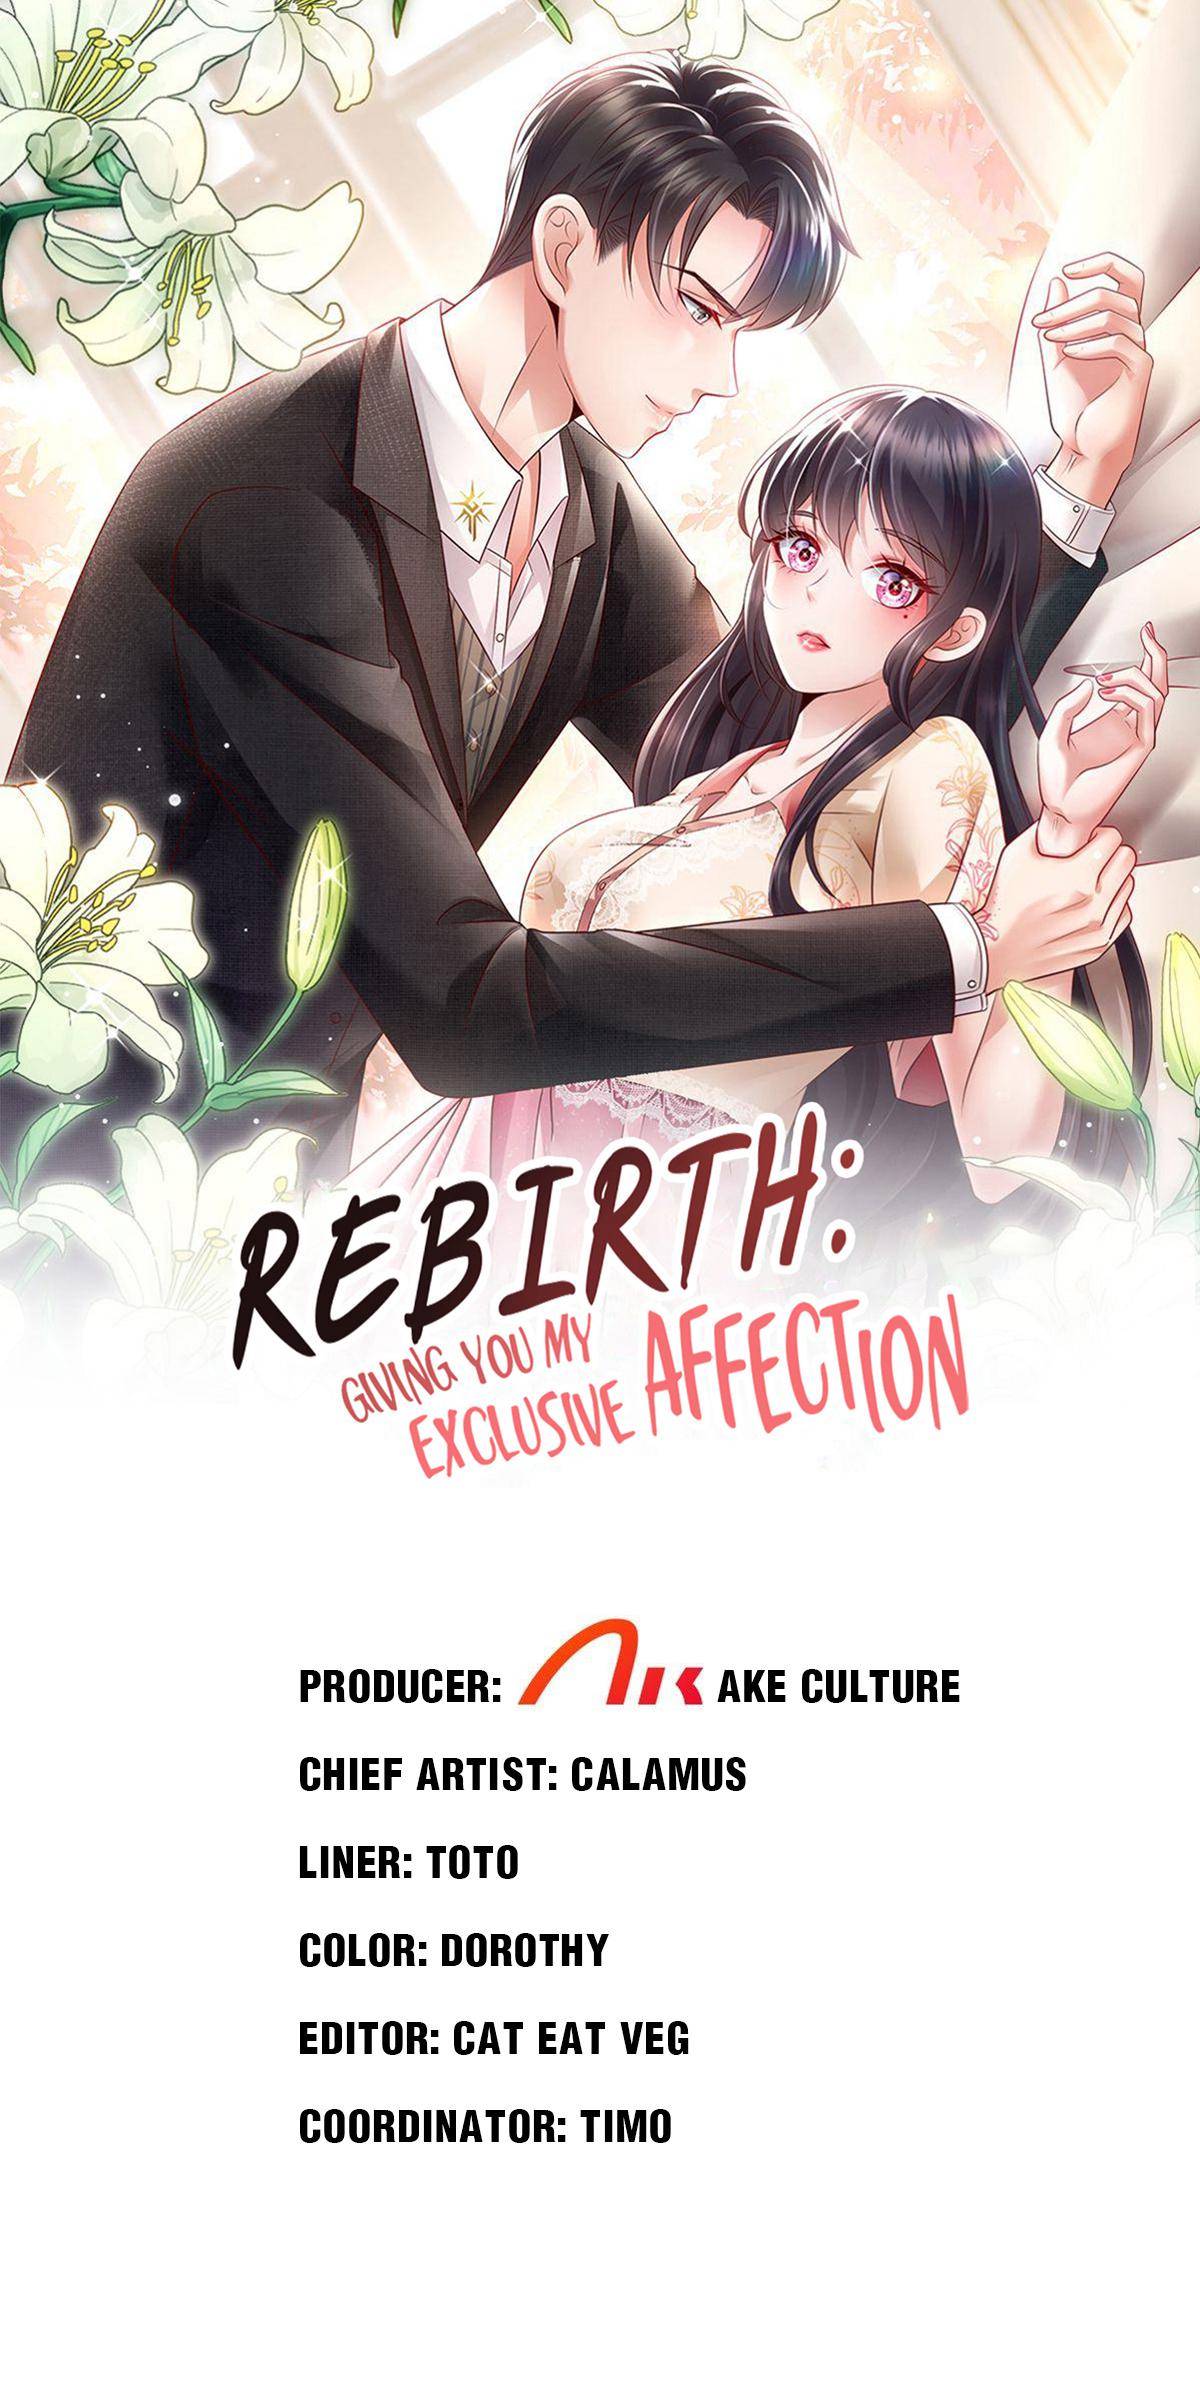 Rebirth: Giving You My Exclusive Affection 230